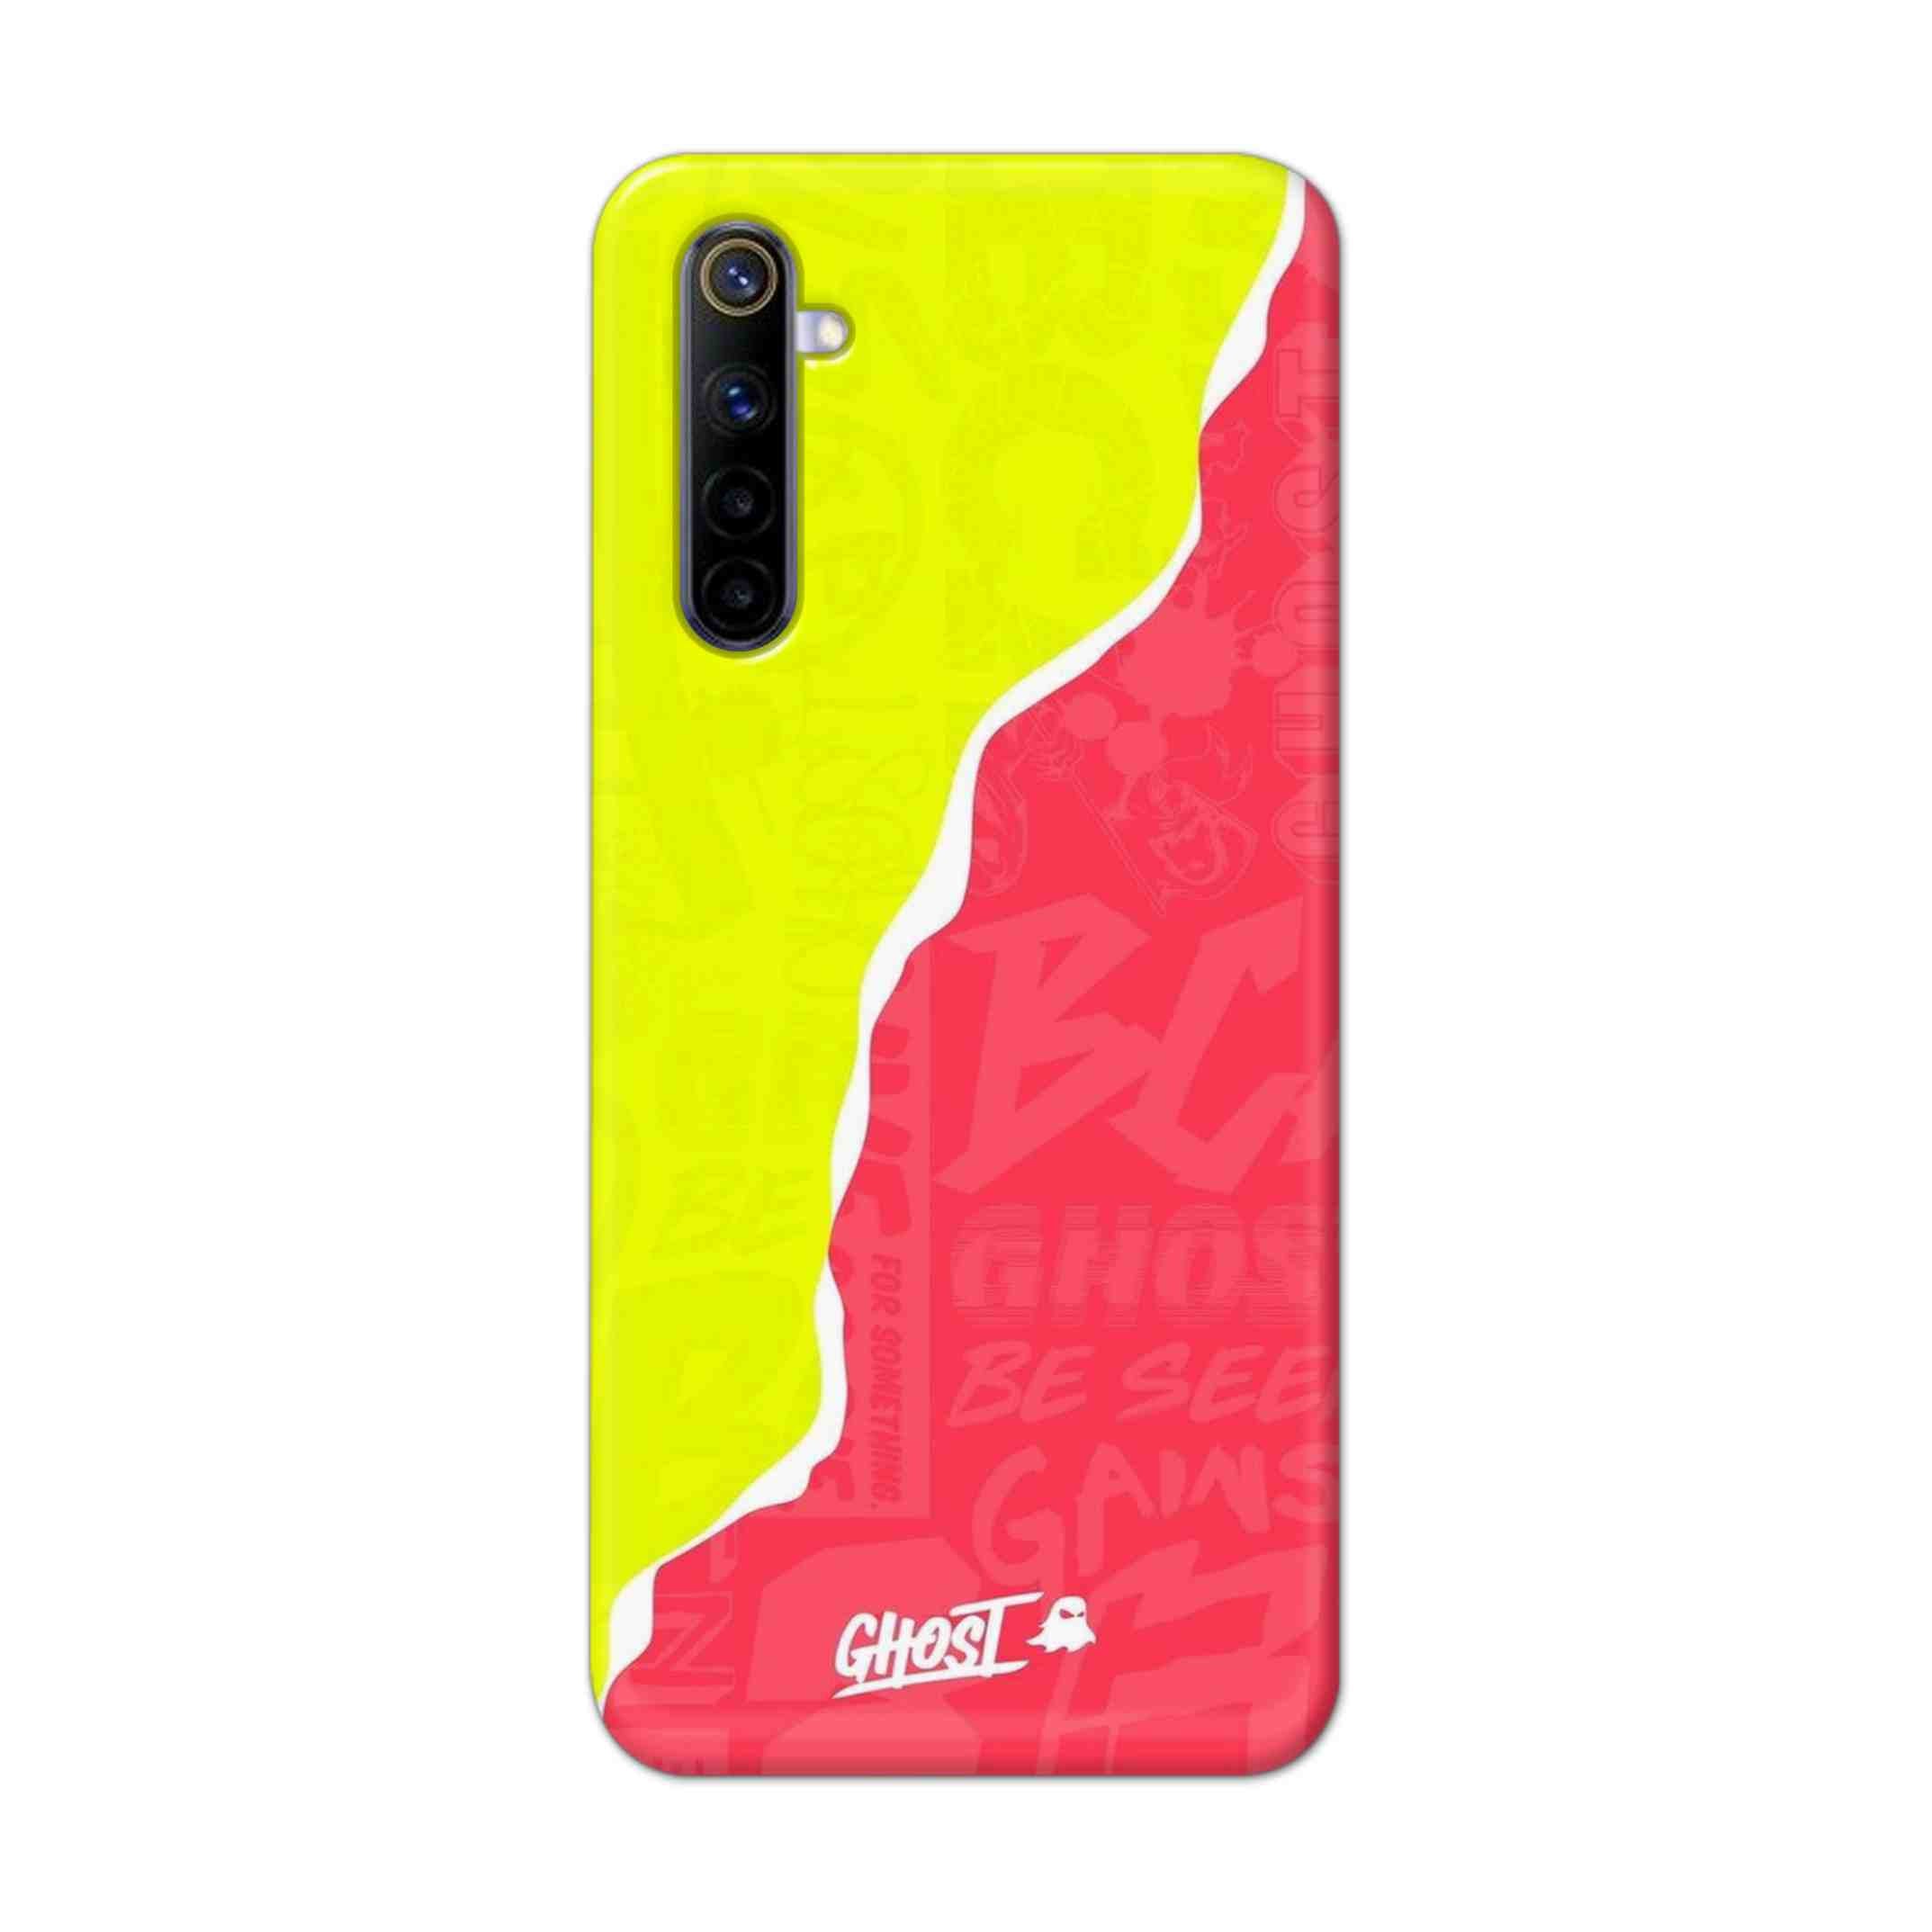 Buy Ghost Hard Back Mobile Phone Case Cover For REALME 6 Online